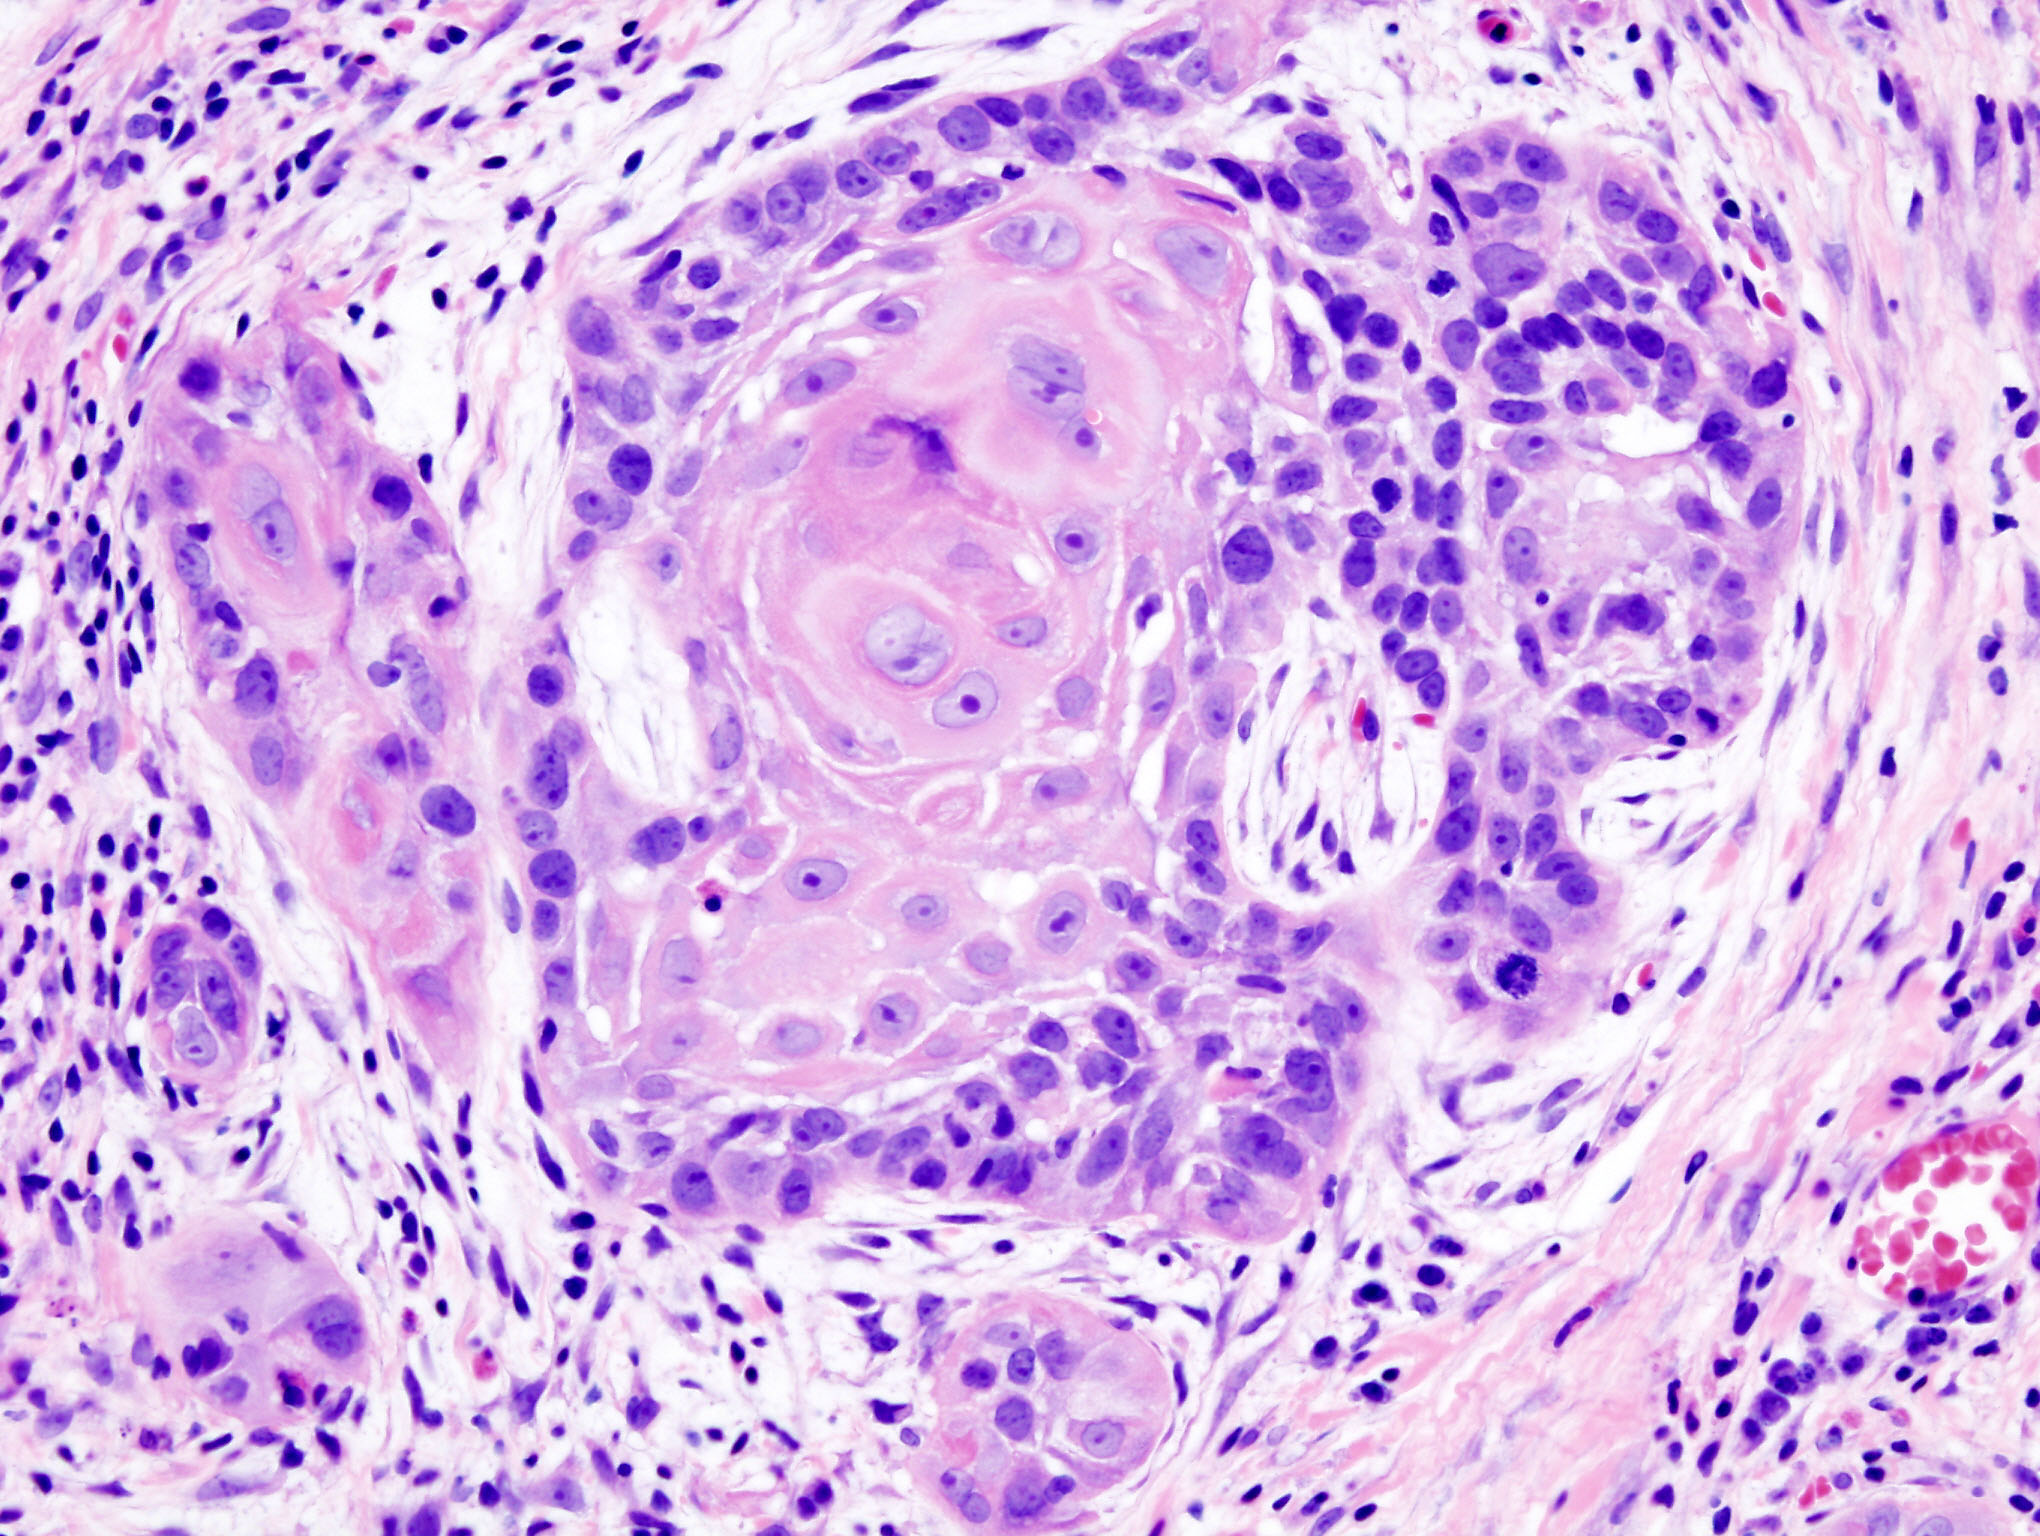 Oral cancer 1 squamous cell carcinoma histopathology